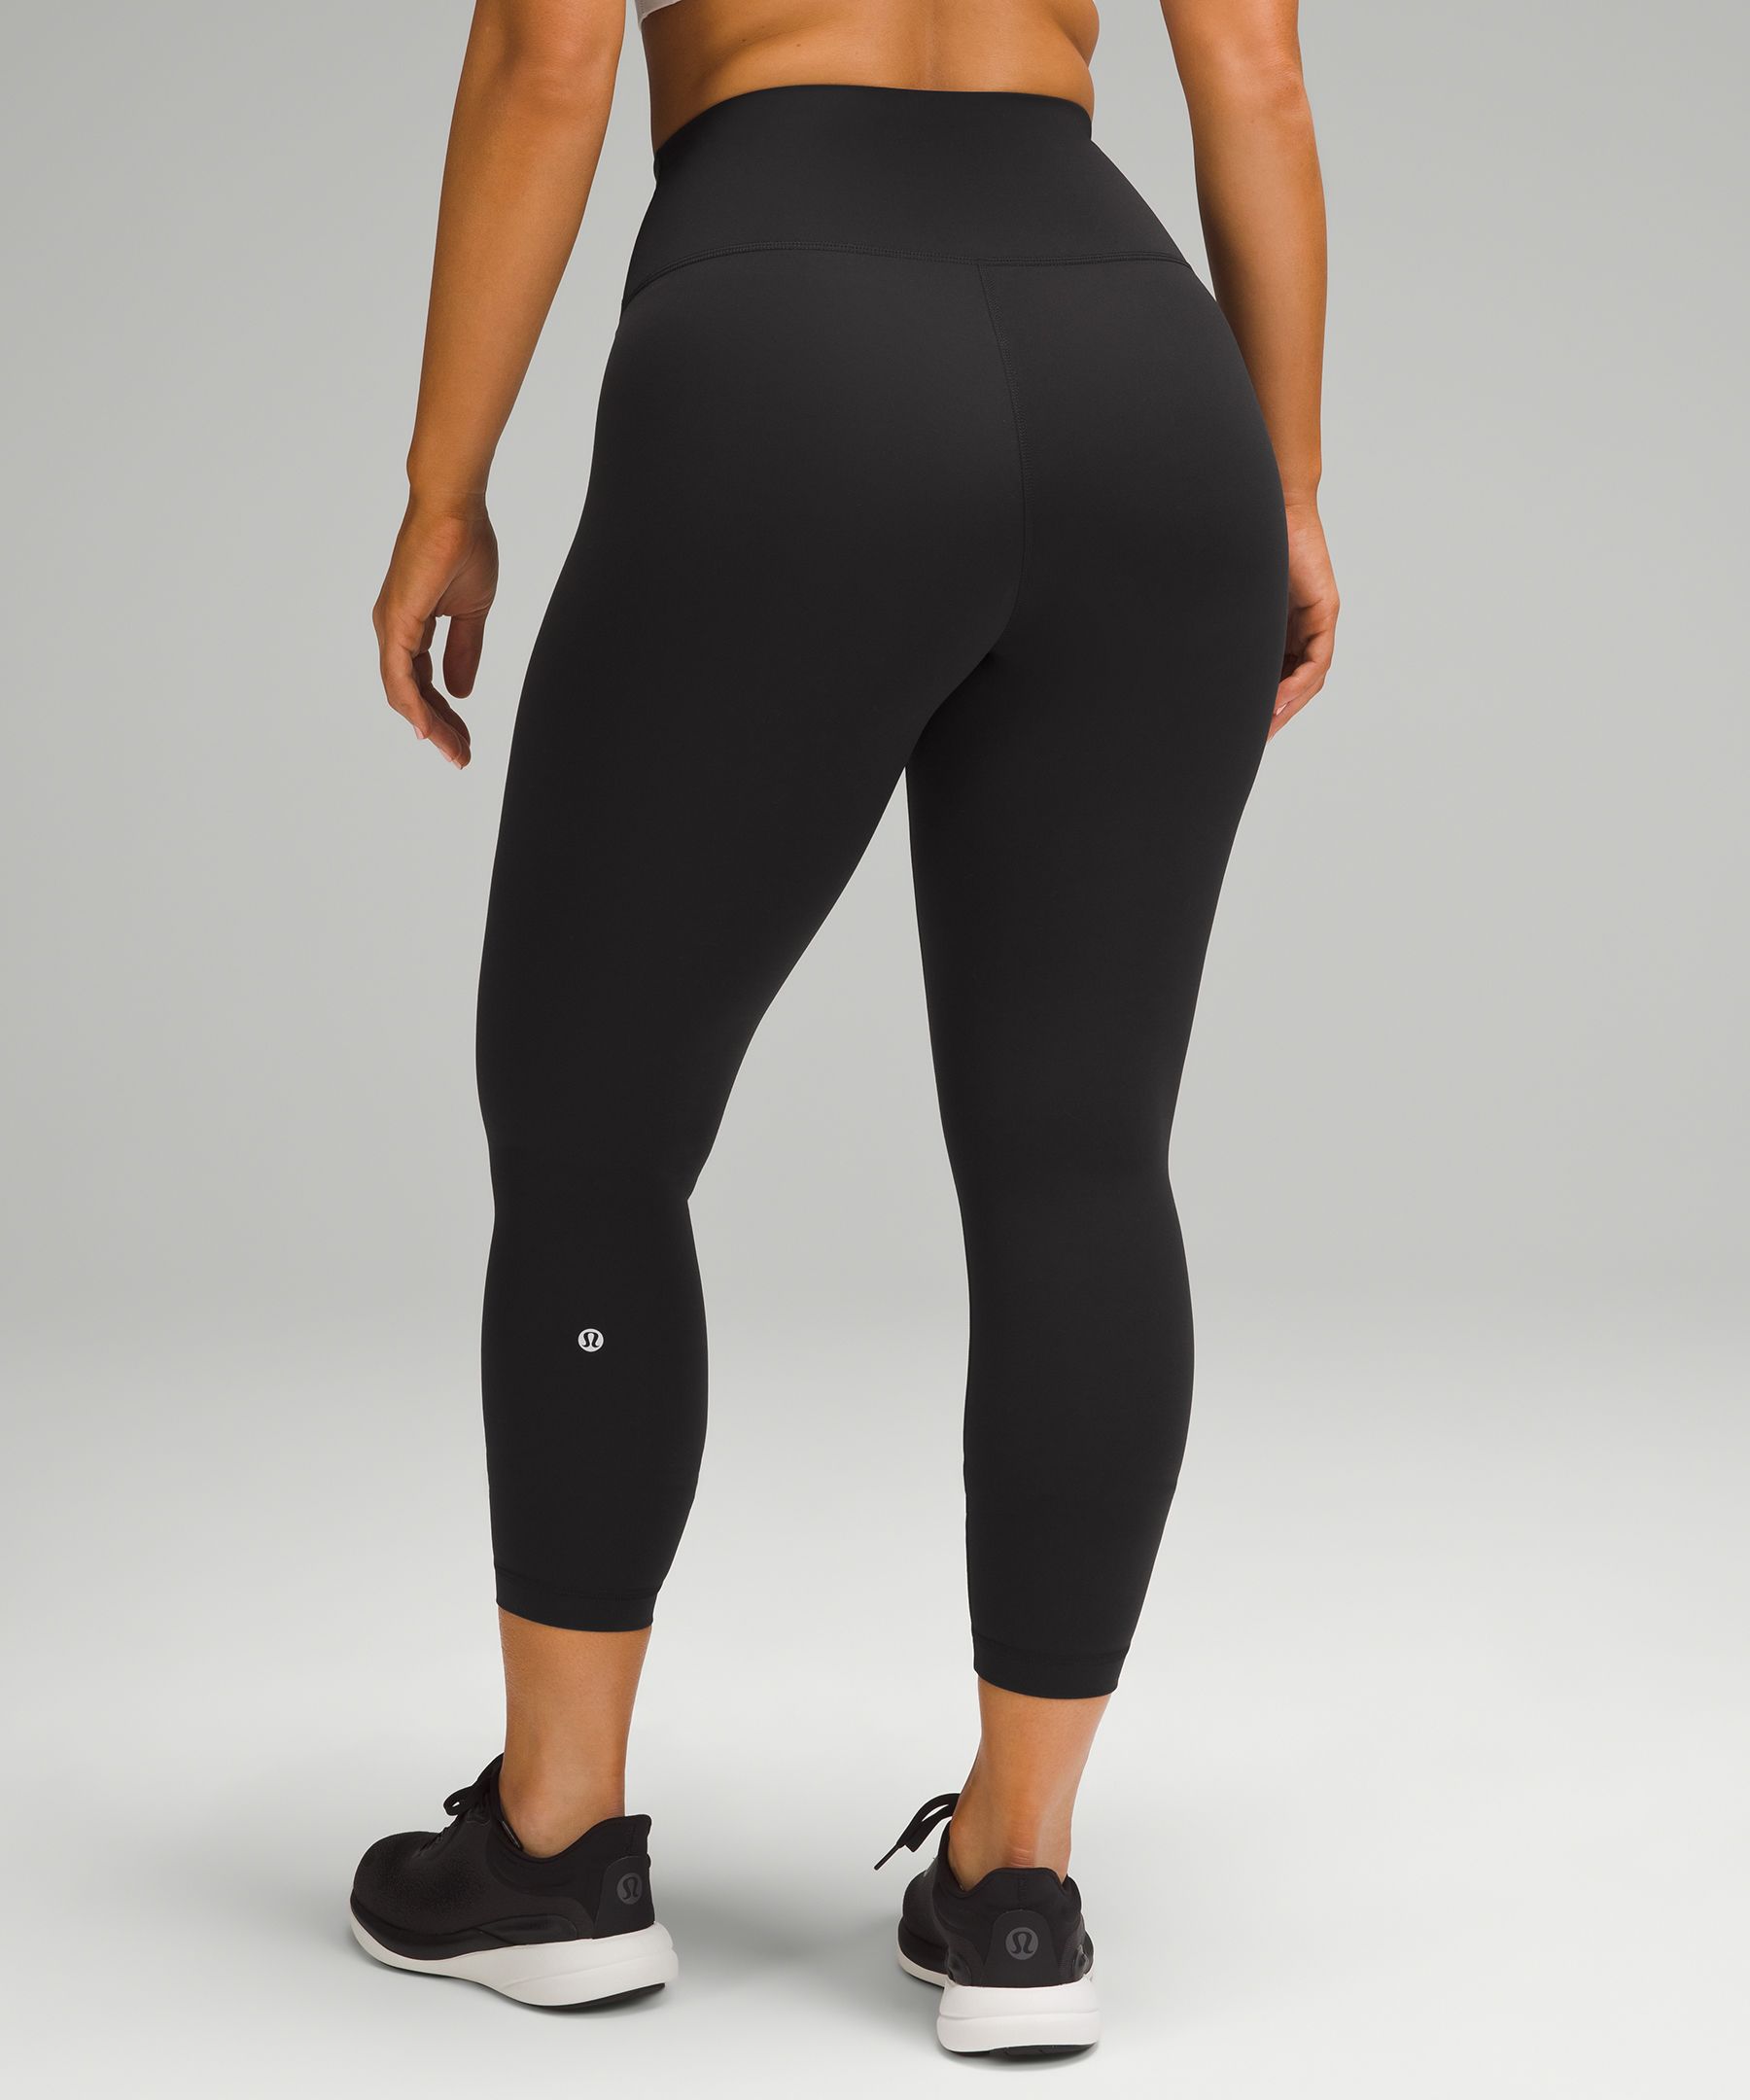 Wunder Train Contour Fit High-Rise Tight 25